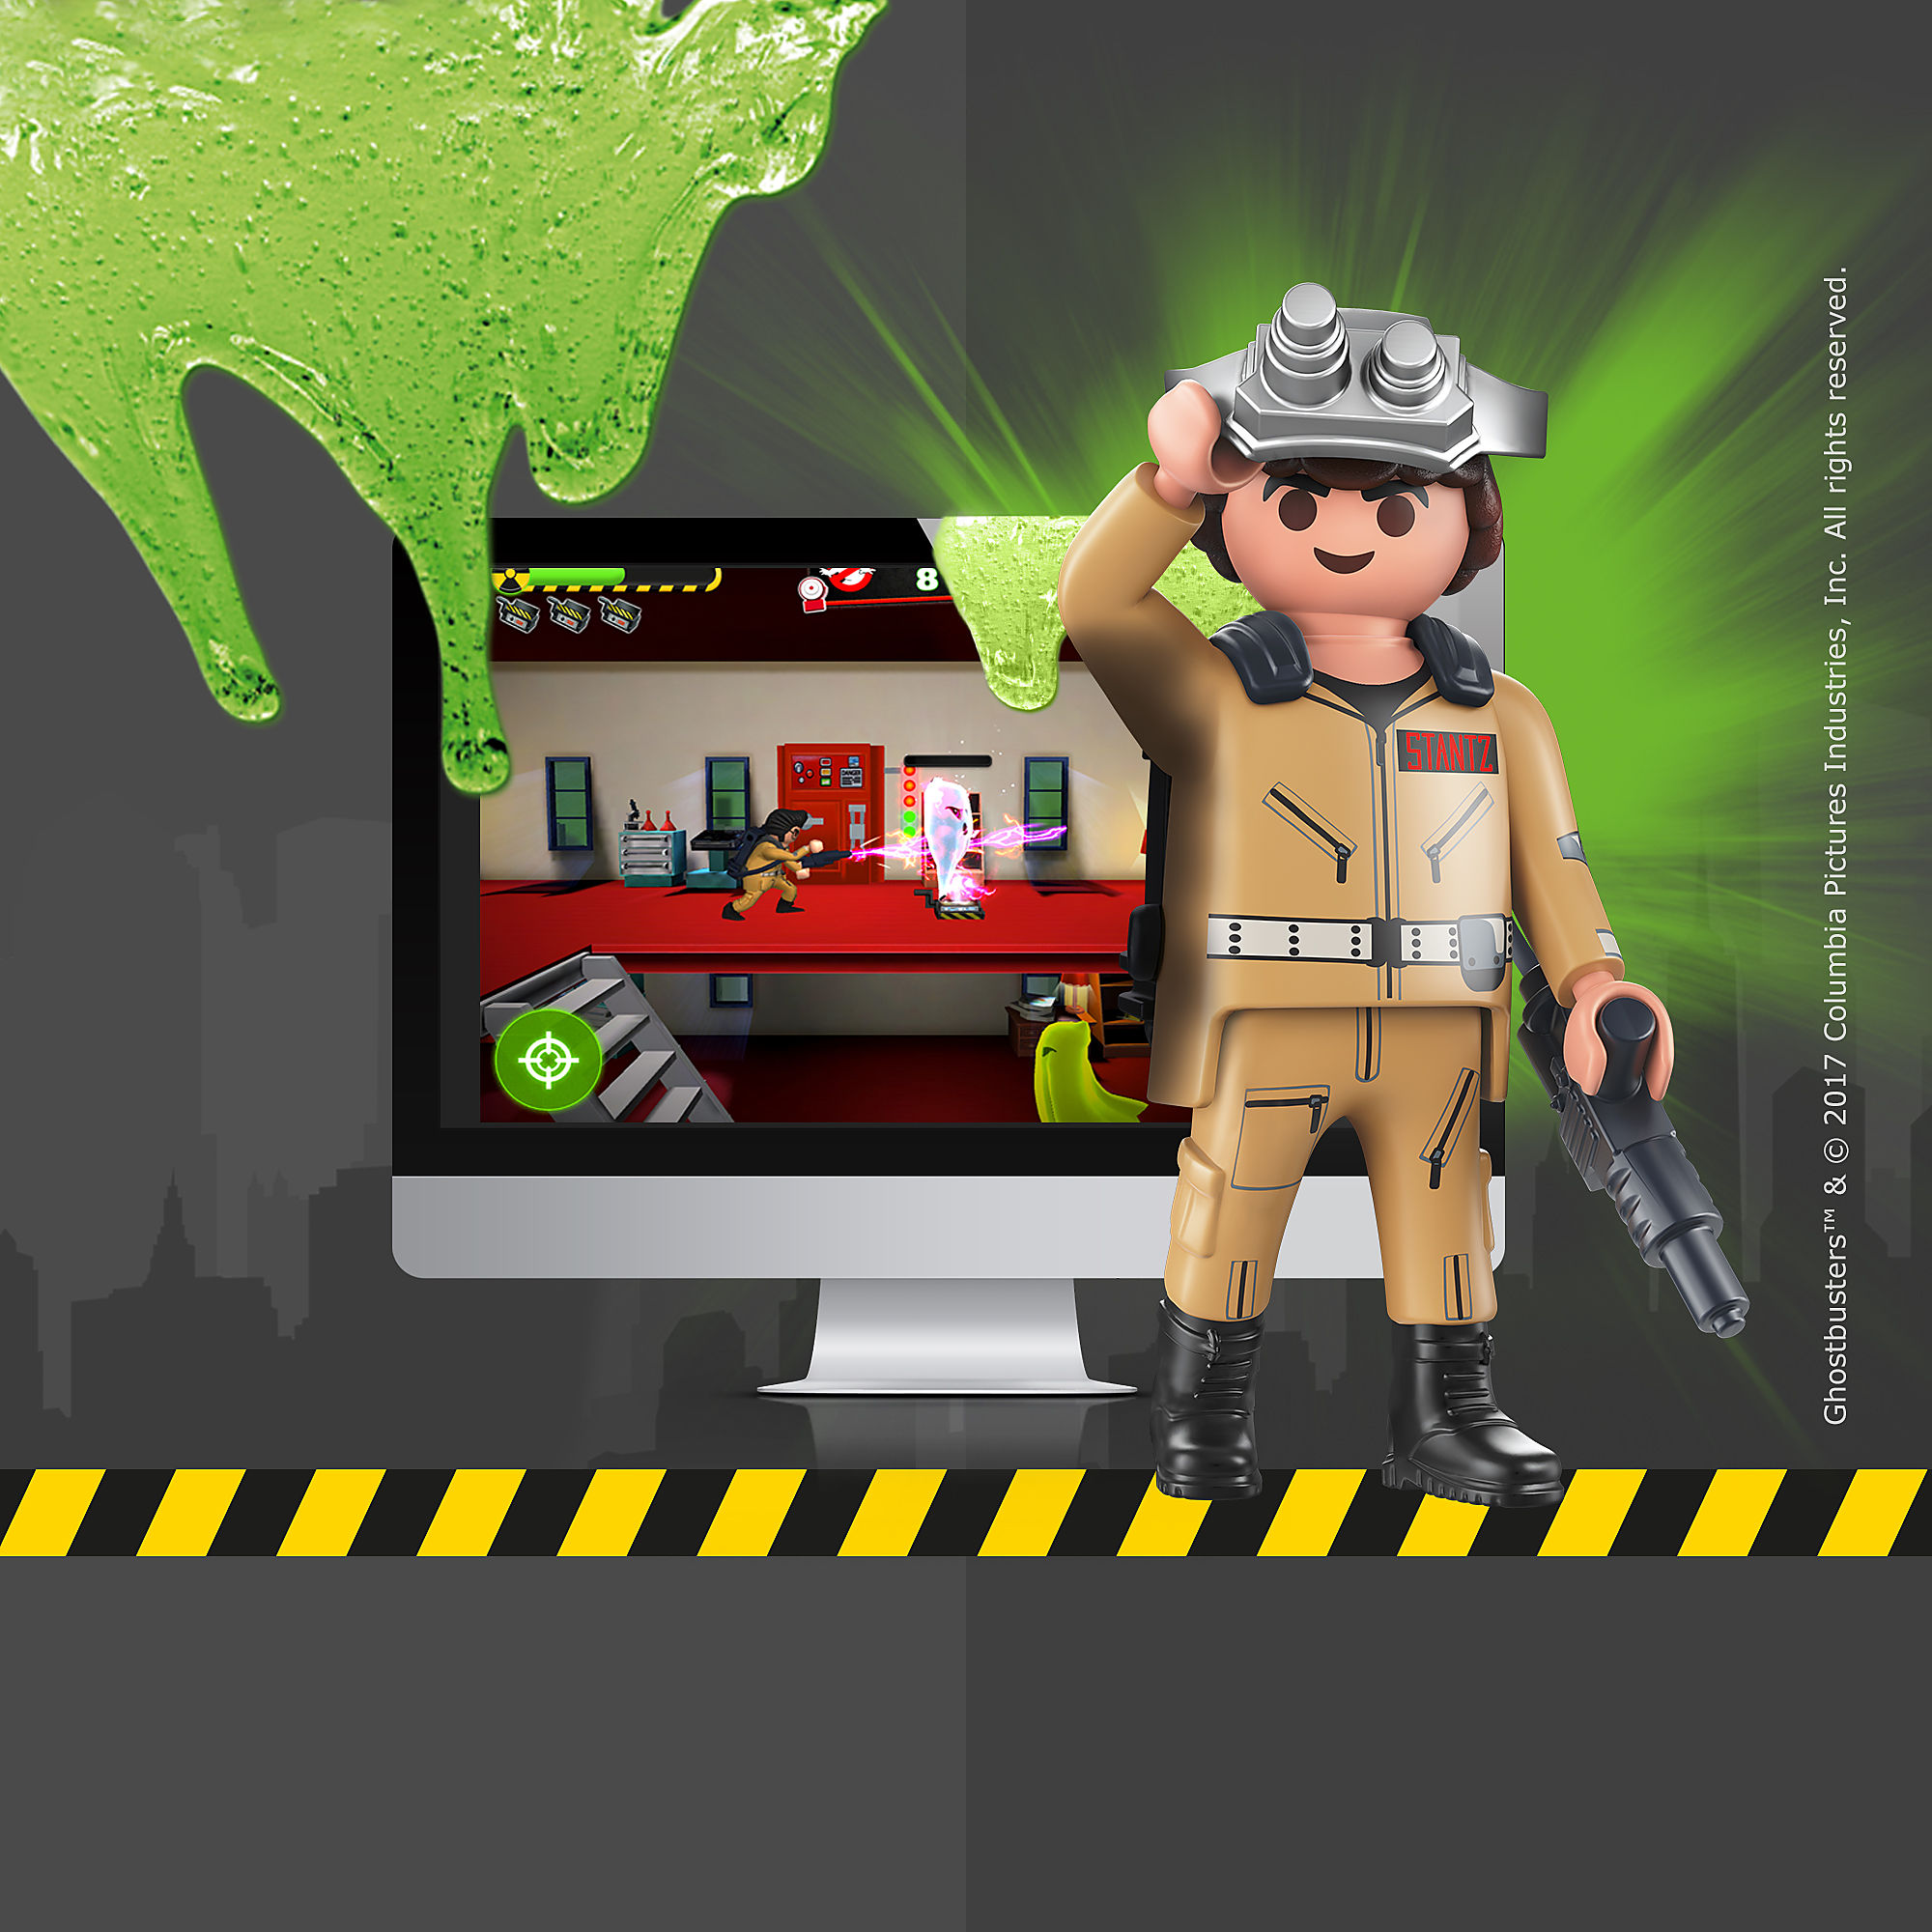 PLAY_ONLINEGAME_GHOSTBUSTERS_2017_01